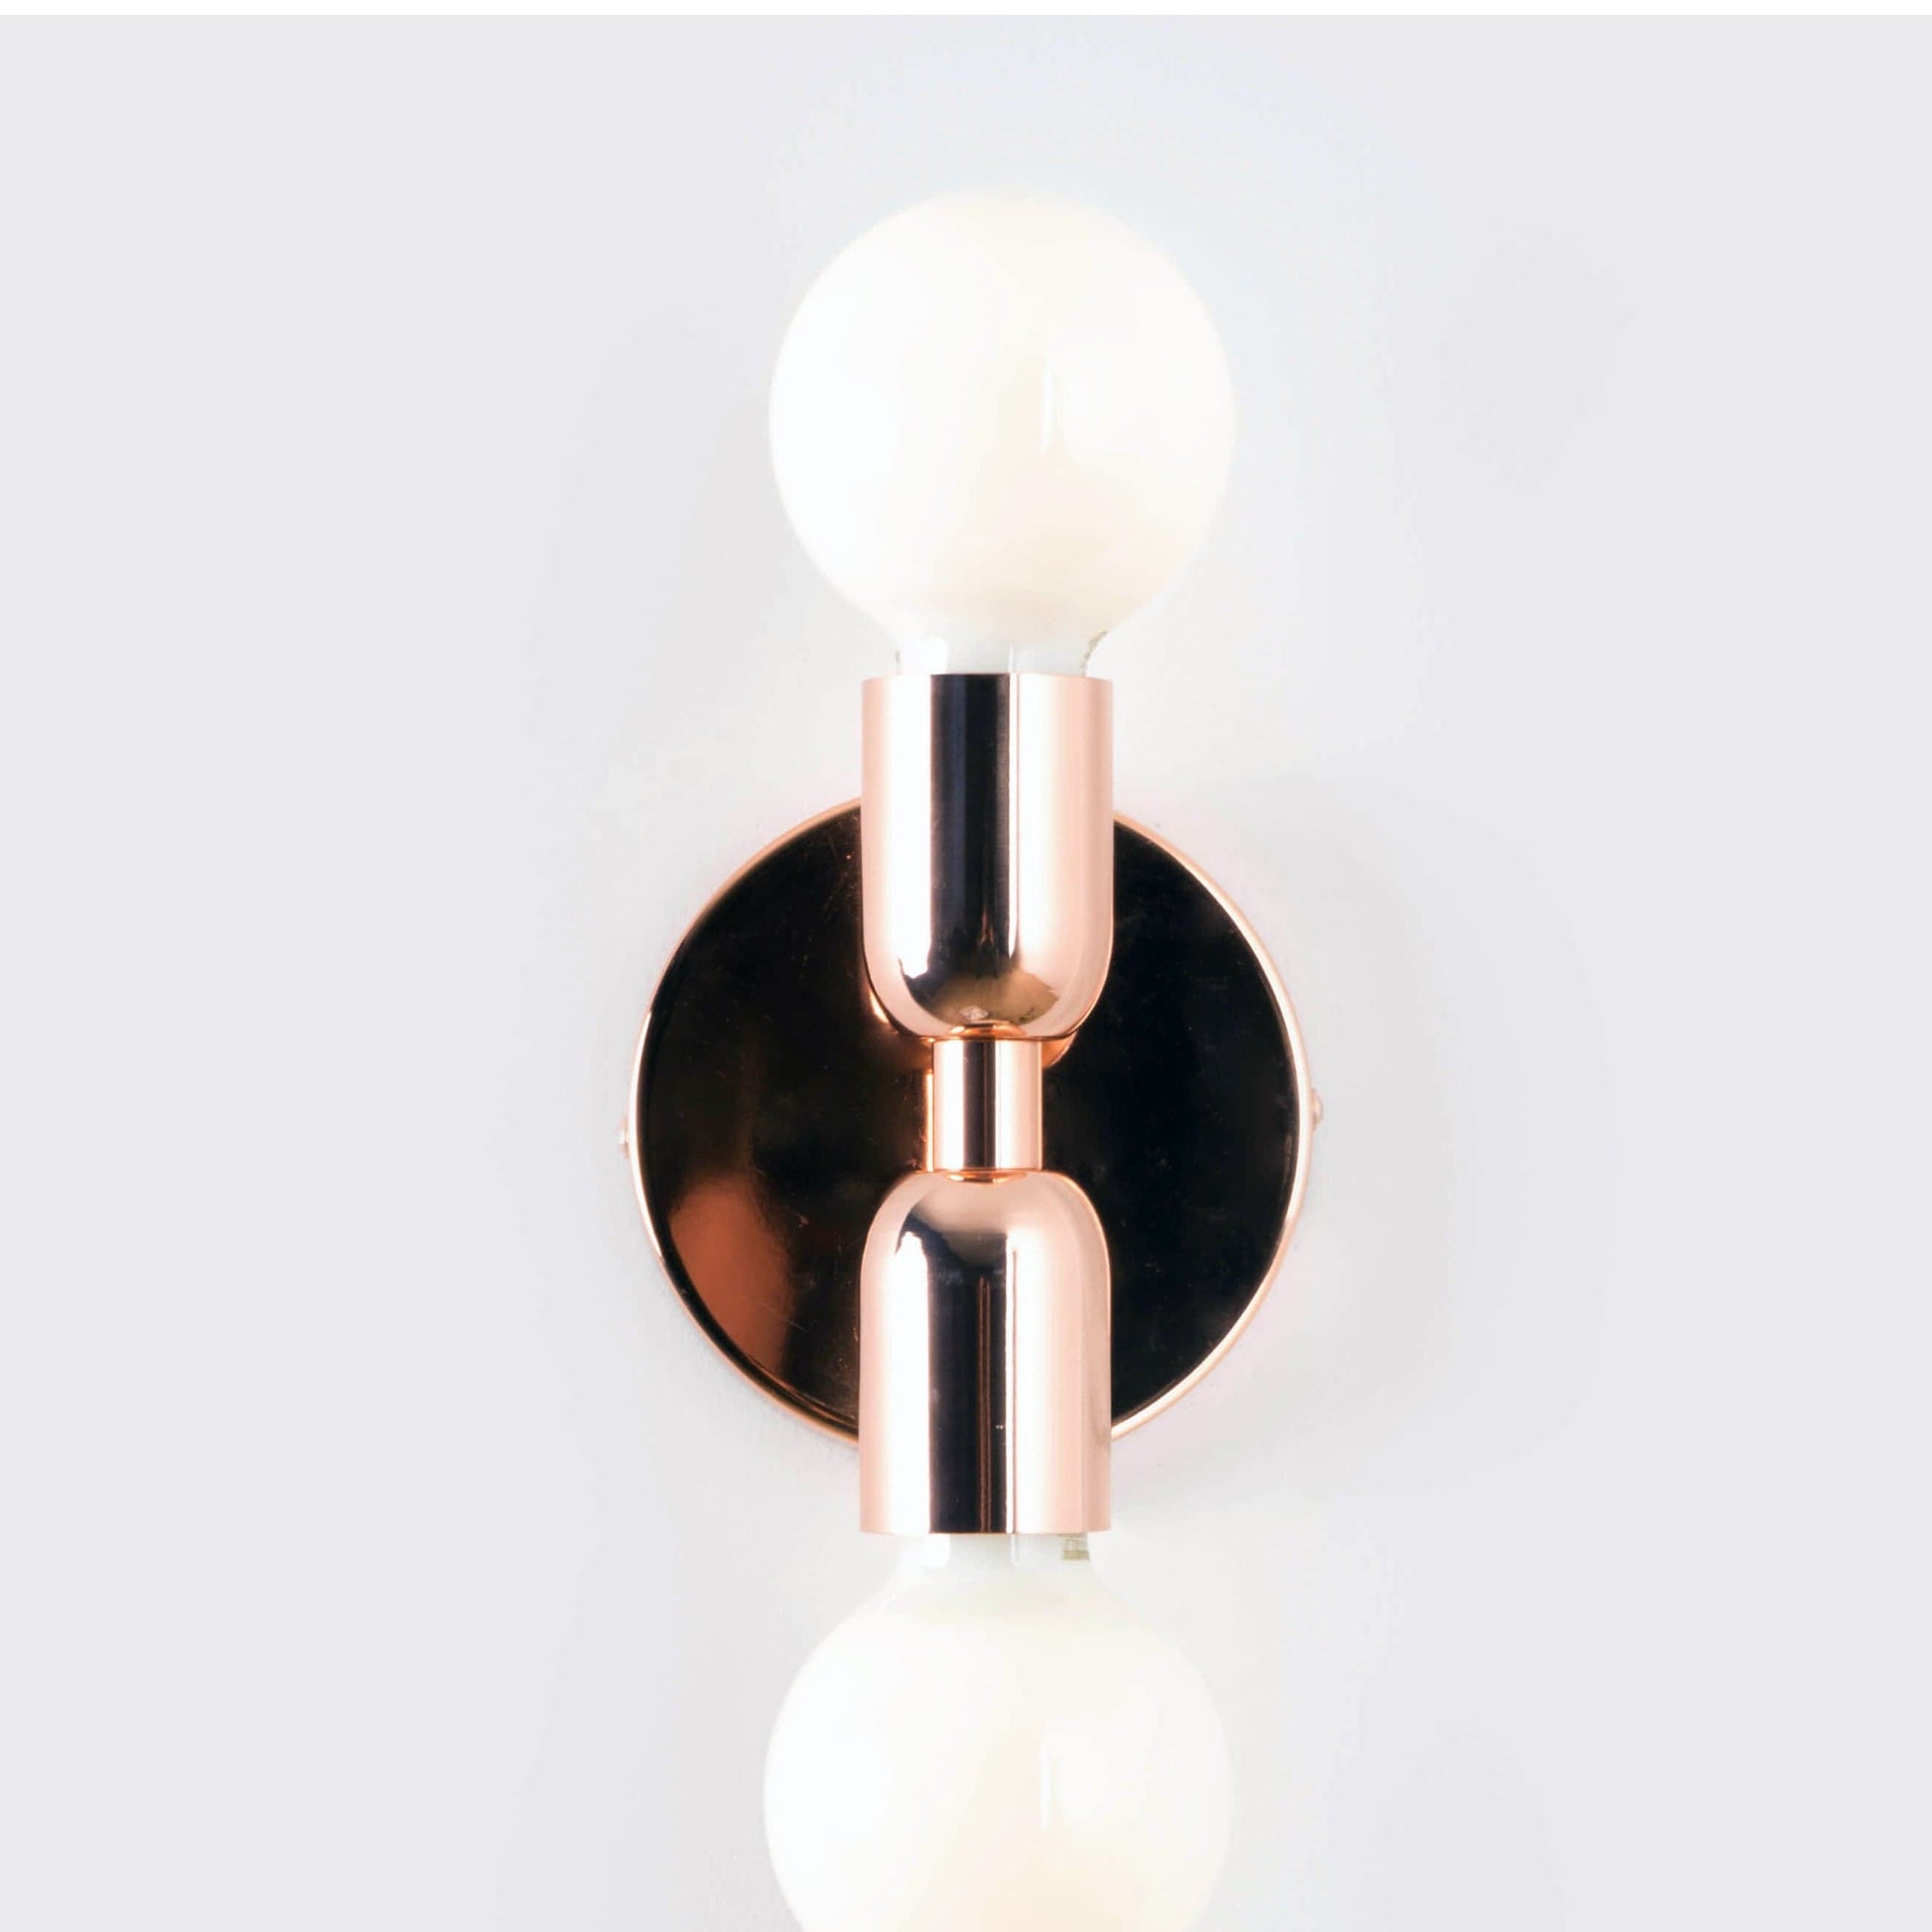 Junction Mini Duo Plug-In Sconce in Polished Copper Finish. View from straight on angle